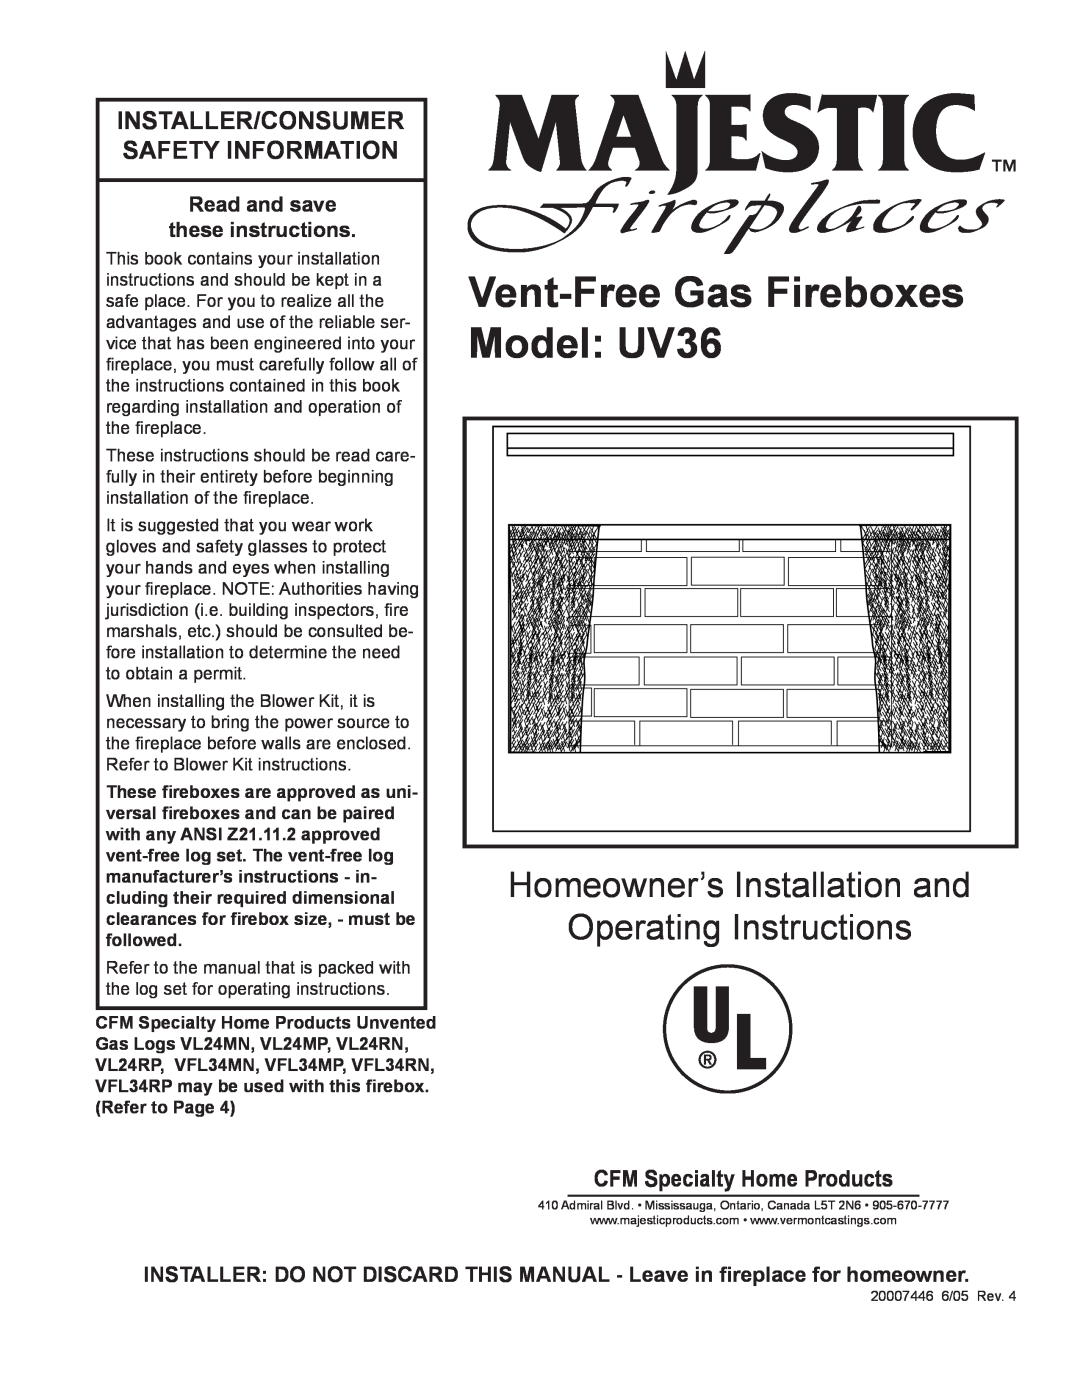 Majestic Appliances installation instructions Vent-FreeGas Fireboxes Model UV36, CFM Specialty Home Products 